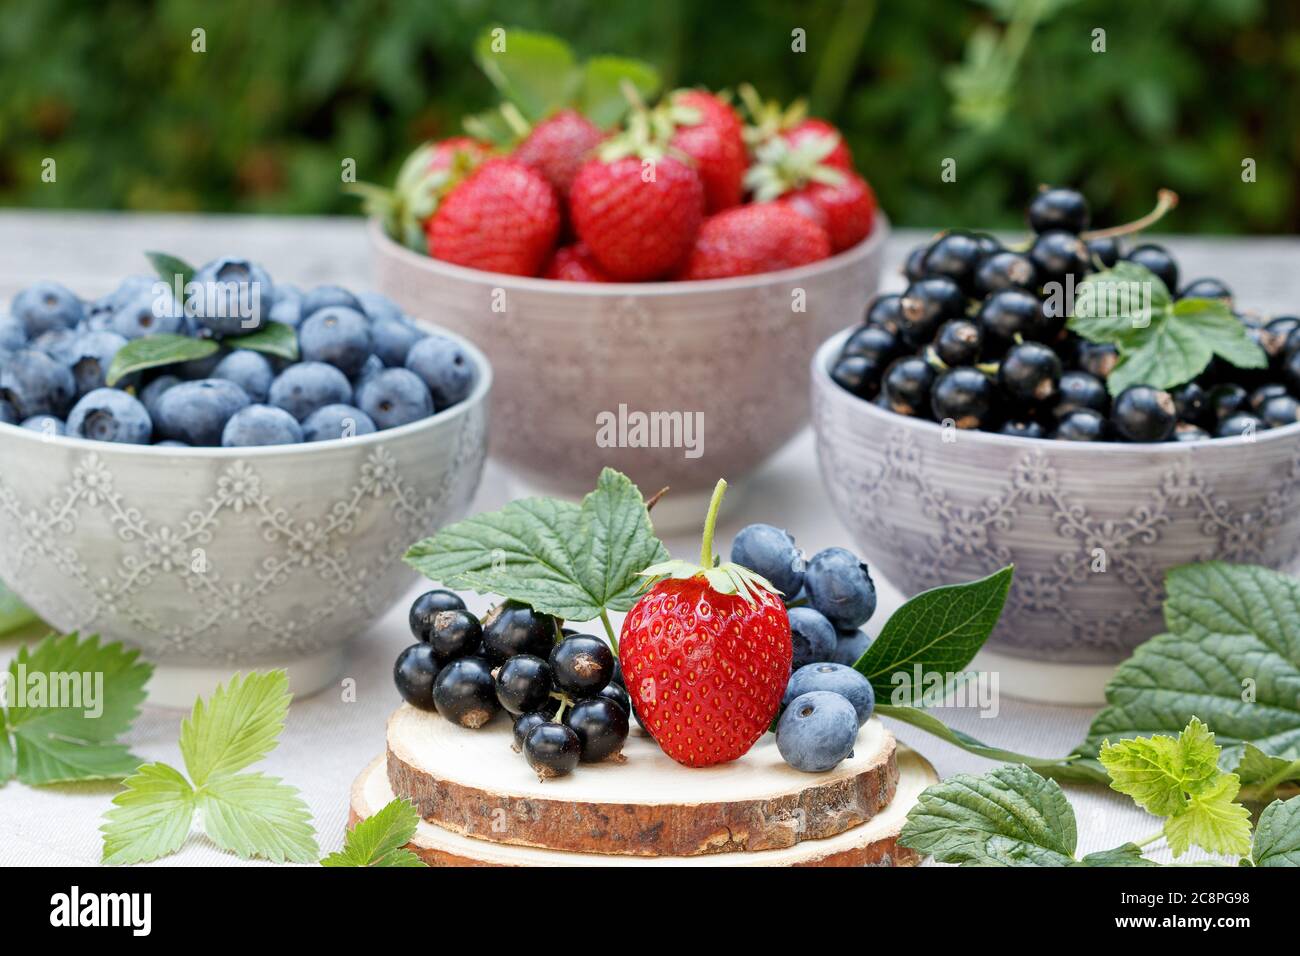 fresh mixed berries strawberry, blueberry and black currant in bowls Stock Photo